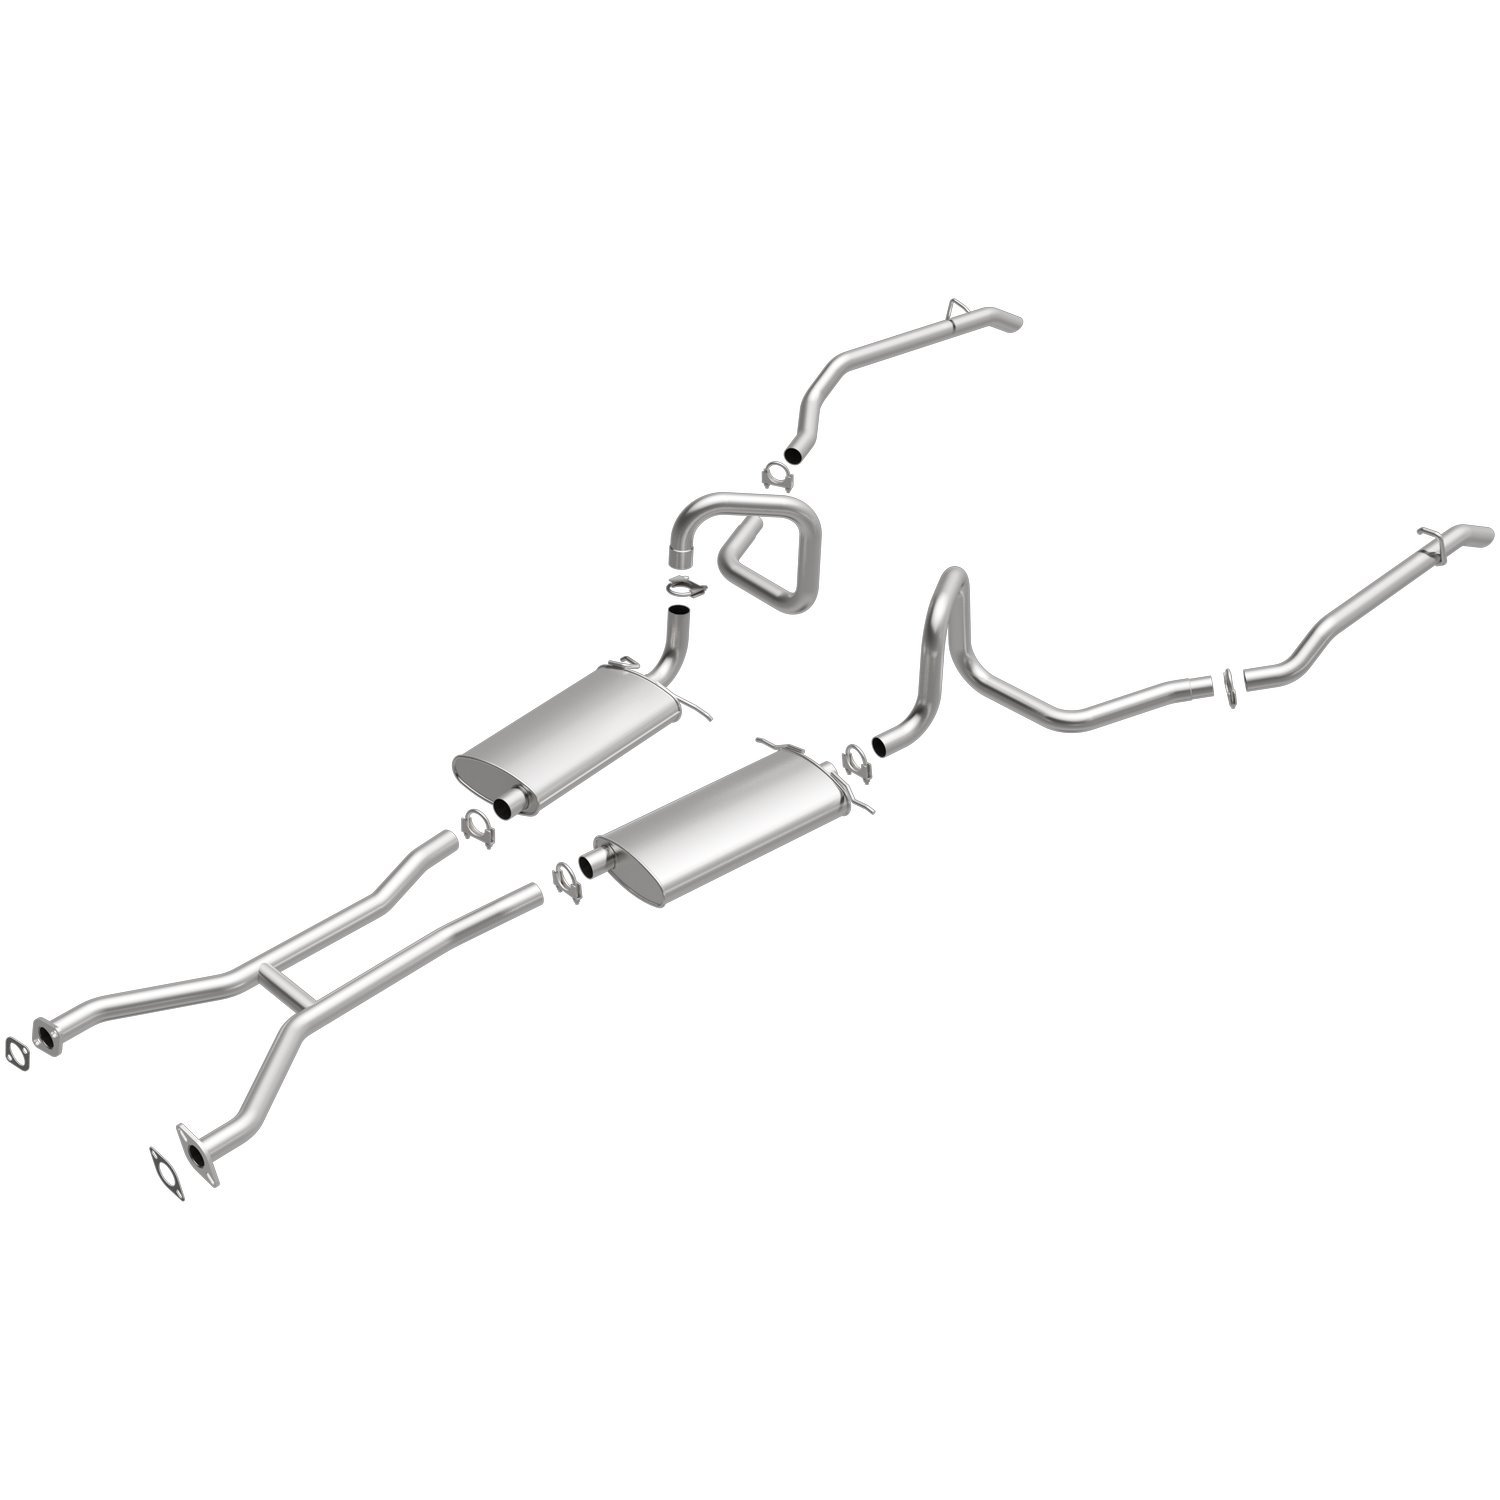 Direct-Fit Exhaust Kit, 1998-2002 Ford Crown Victoria 4.6L